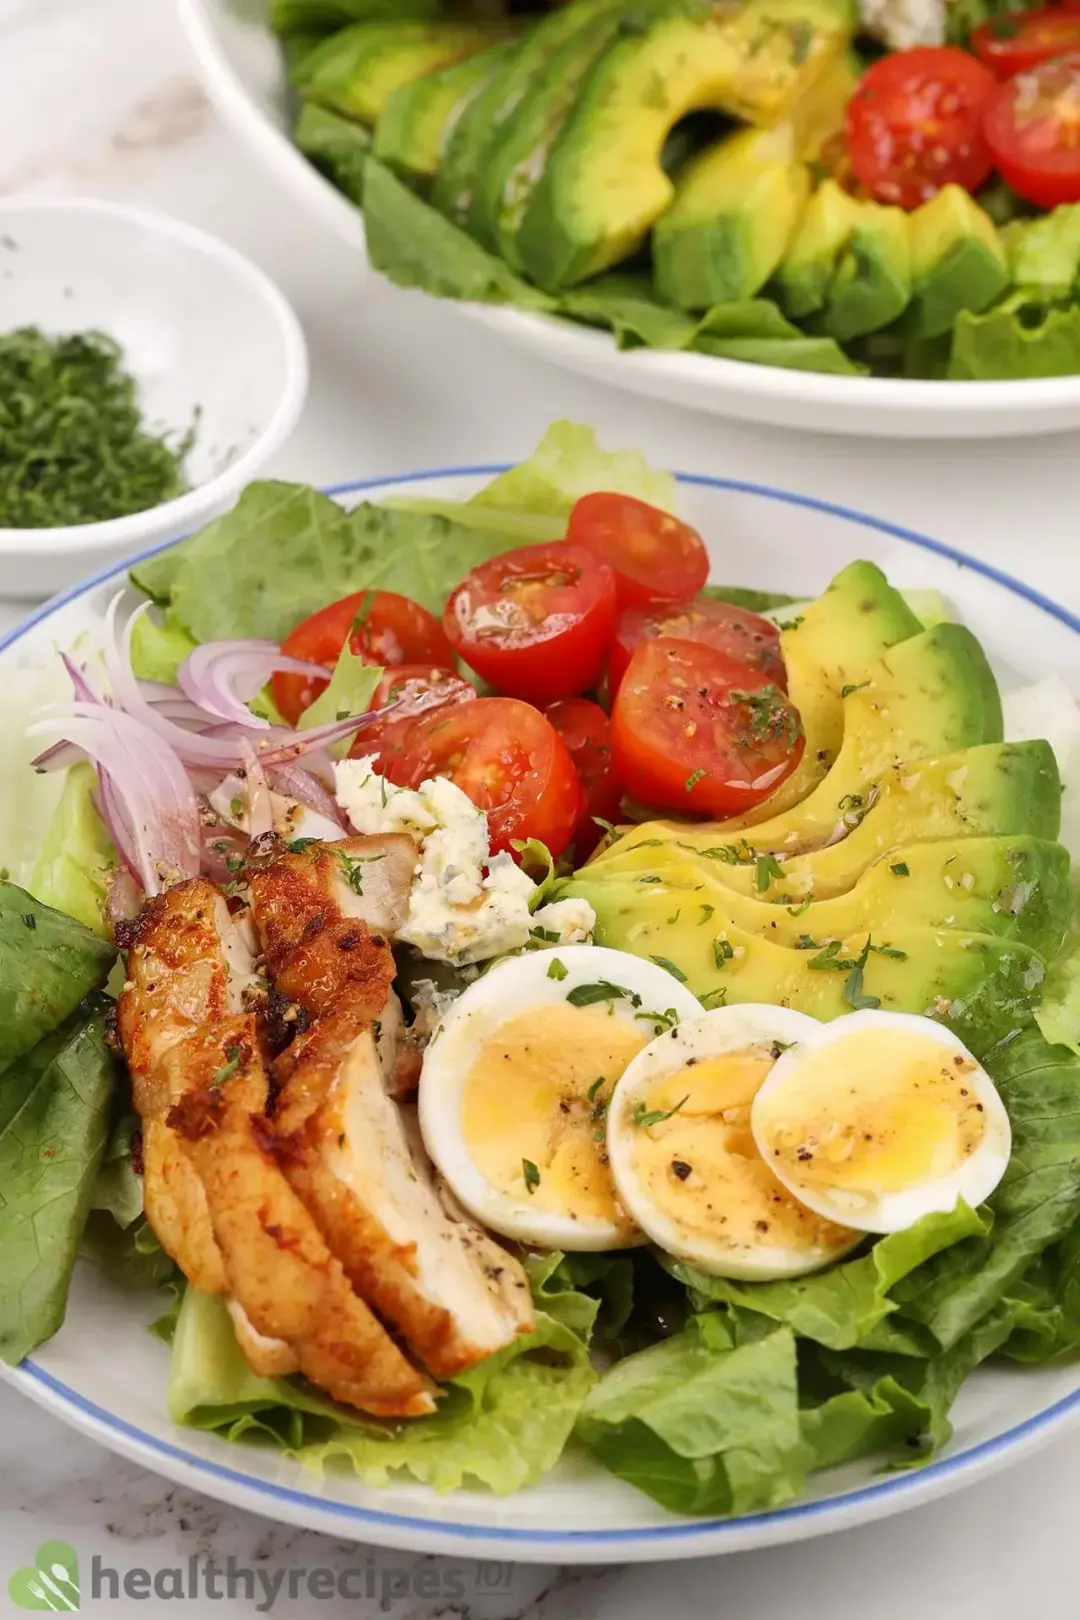 What to Eat With Cobb Salad